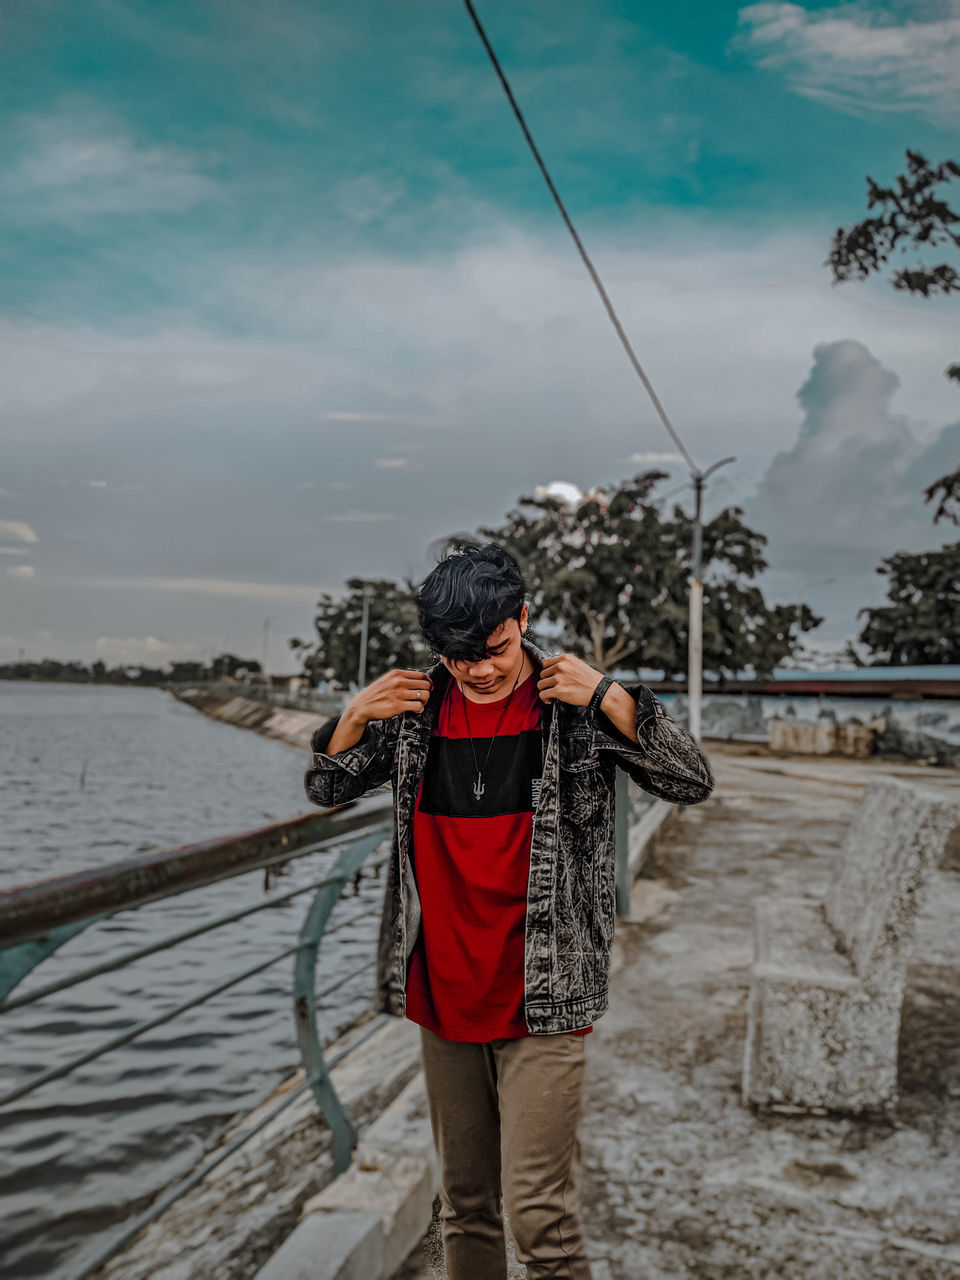 water, cloud, sky, one person, nature, sea, adult, leisure activity, men, activity, standing, full length, front view, lifestyles, holiday, vacation, clothing, land, trip, young adult, casual clothing, outdoors, beach, fishing, rope, day, travel, beauty in nature, holding, fishing rod, person, adventure, scenics - nature, motion, travel destinations